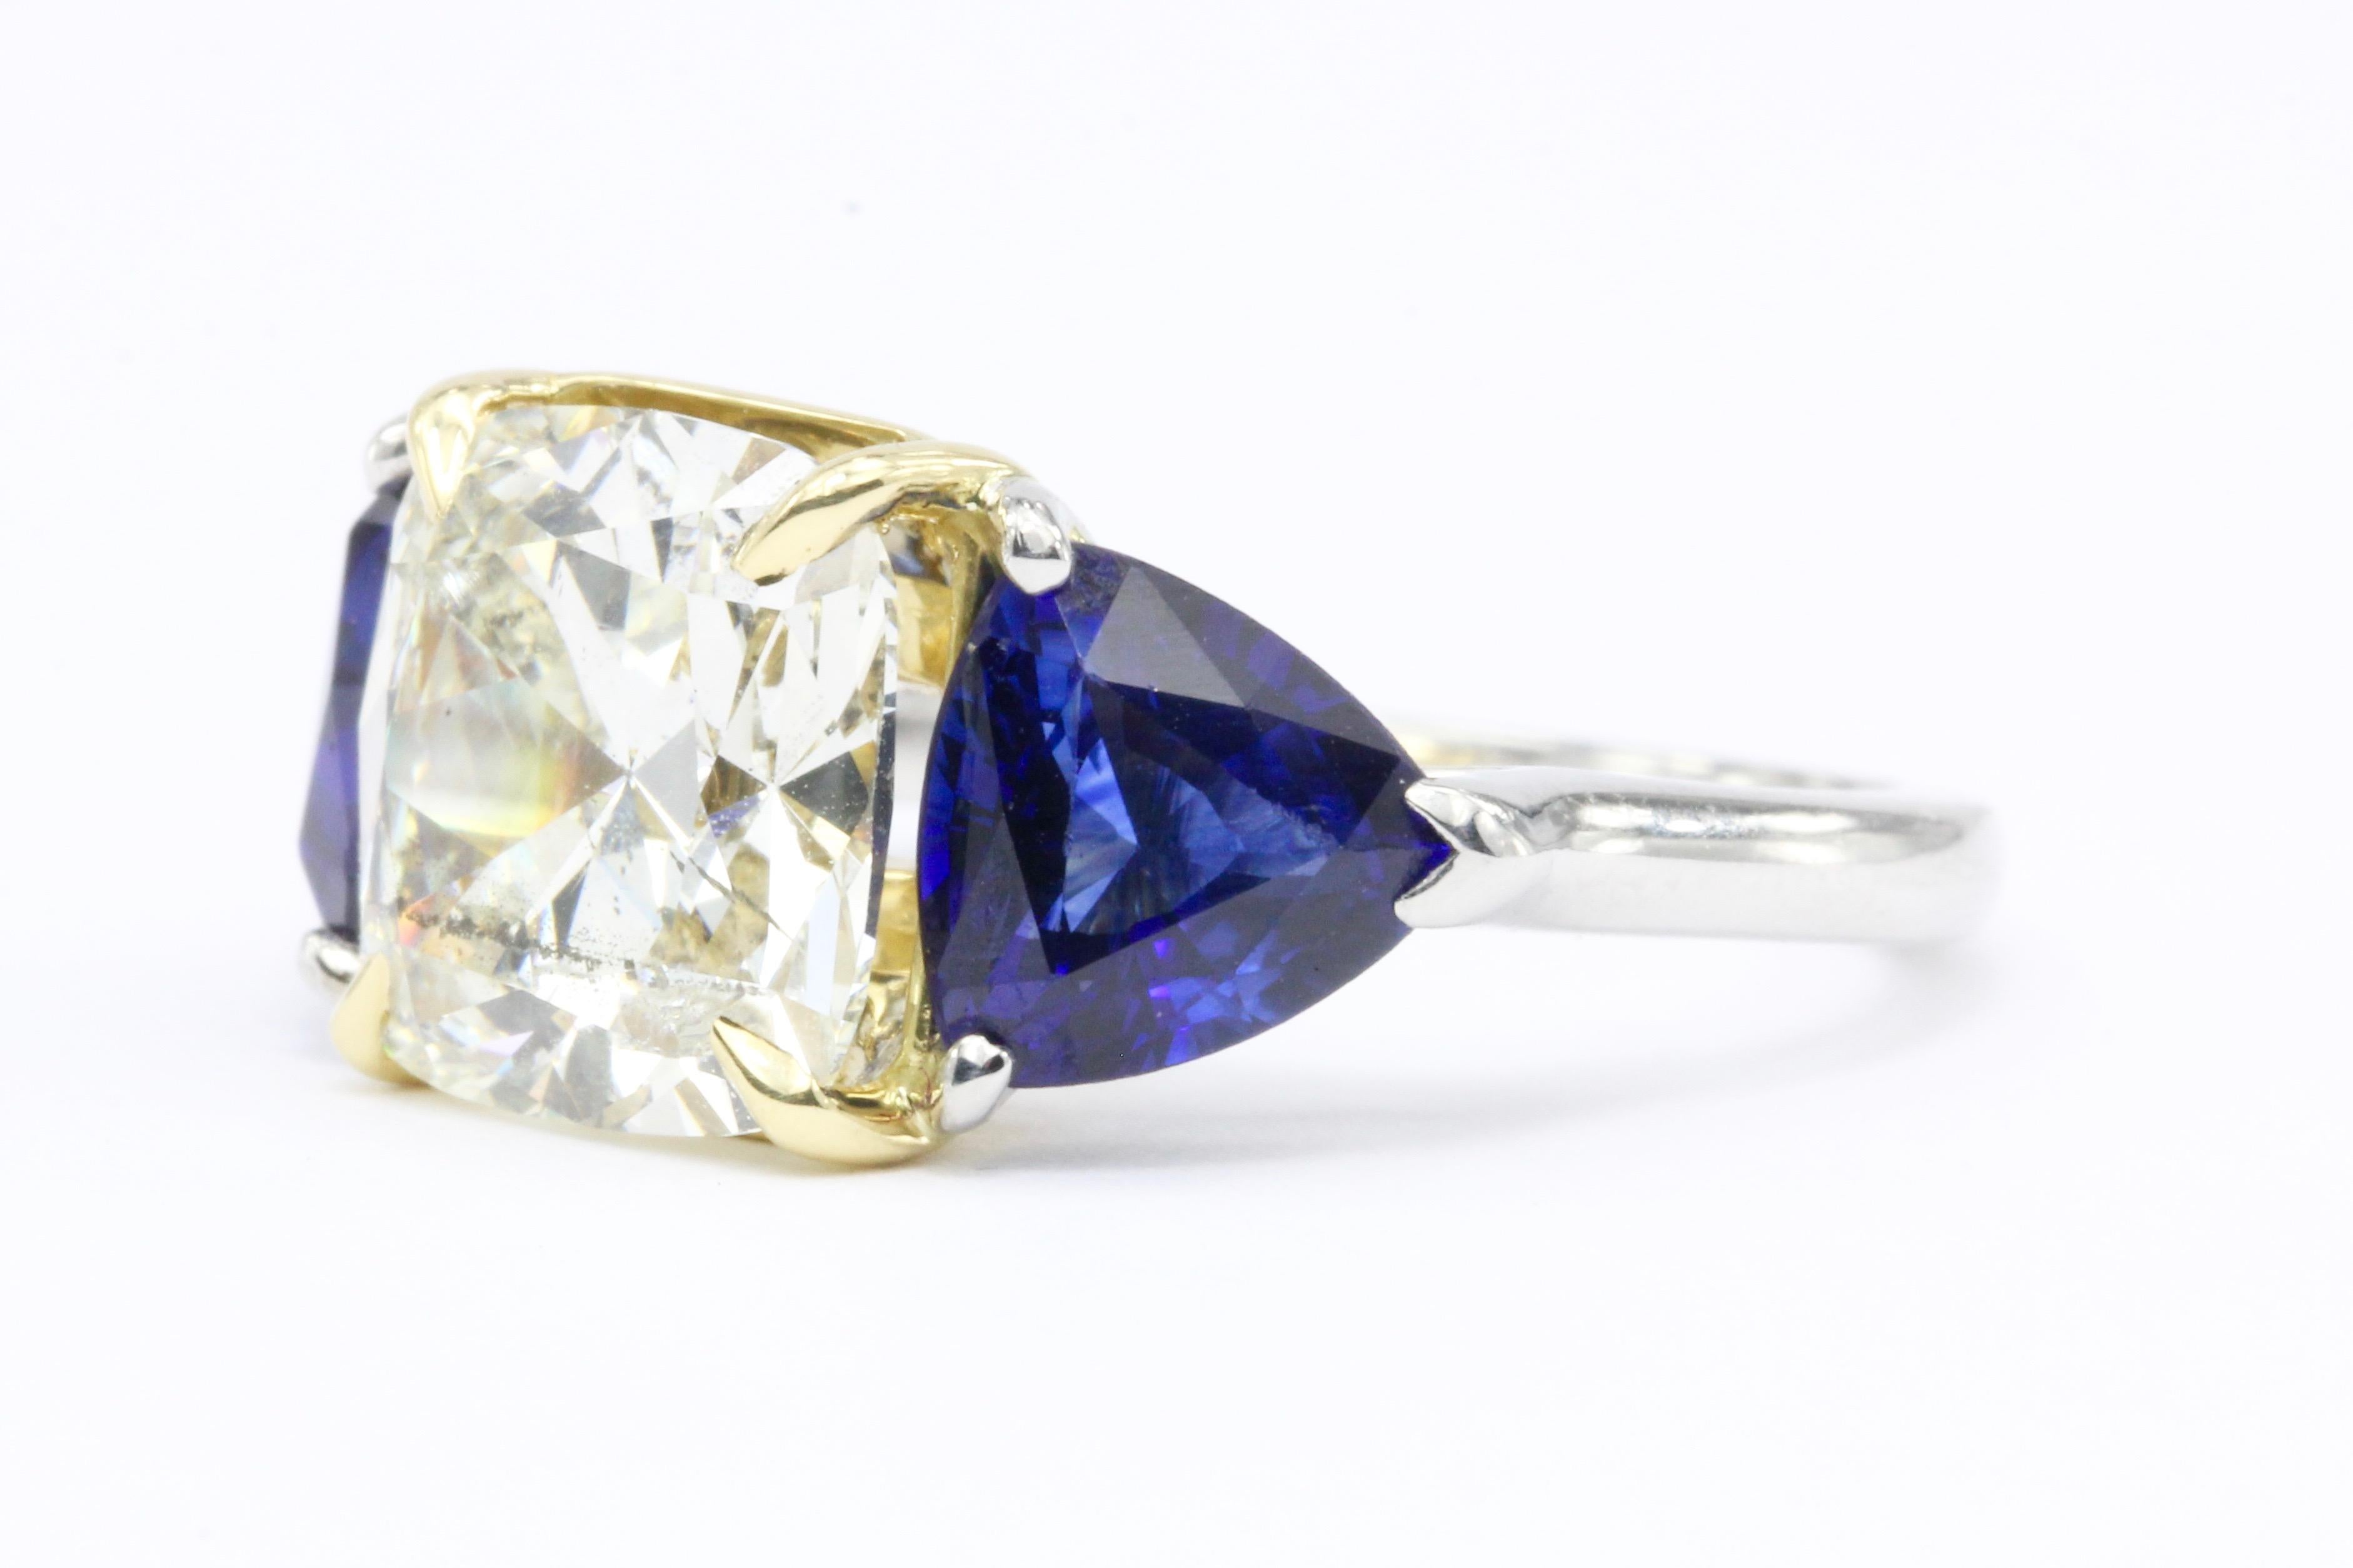 Hallmarks: PT 950 750

Composition: 18K White Gold & Platinum Setting

Primary Stone: Cushion Cut Diamond

Stone Carat: 3.11 Carats

Color / Clarity: M / I1

Accent Stone: 2 .75 carats (1.5 ctw) Trillion Cut Natural Blue Sapphires

Ring Width: